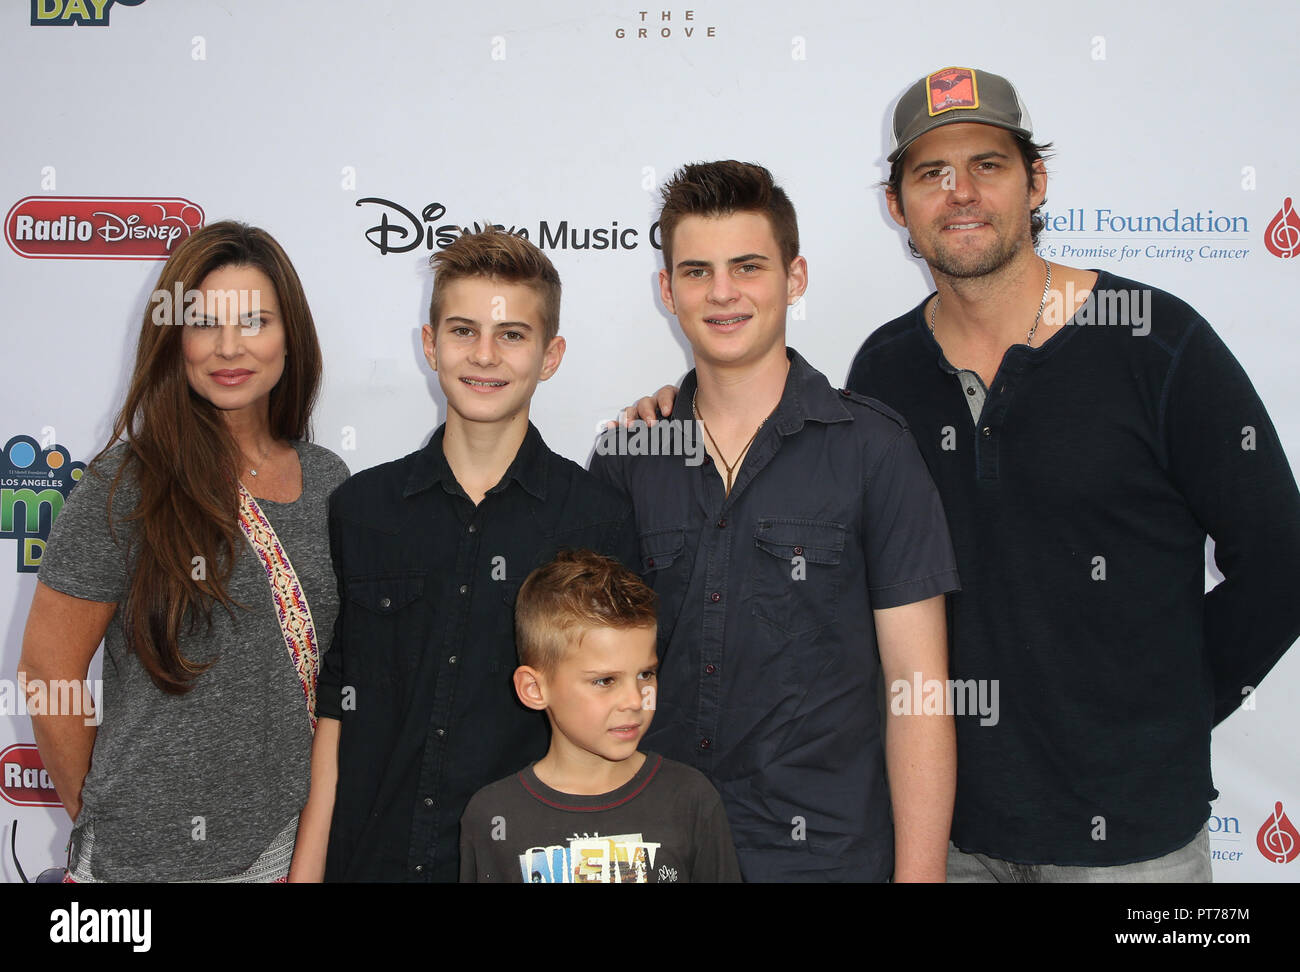 Los Angeles, Ca, USA. 6th Oct, 2018. Kristoffer Polaha, Julianne Morris, Micah Polaha, Kristoffer Caleb Polaha, Jude Polaha, at the T.J. Martell Foundation Hosts 9th Annual LA Family Day at The Grove in Los Angeles California on October 6, 2018. Credit: Faye Sadou/Media Punch/Alamy Live News Stock Photo